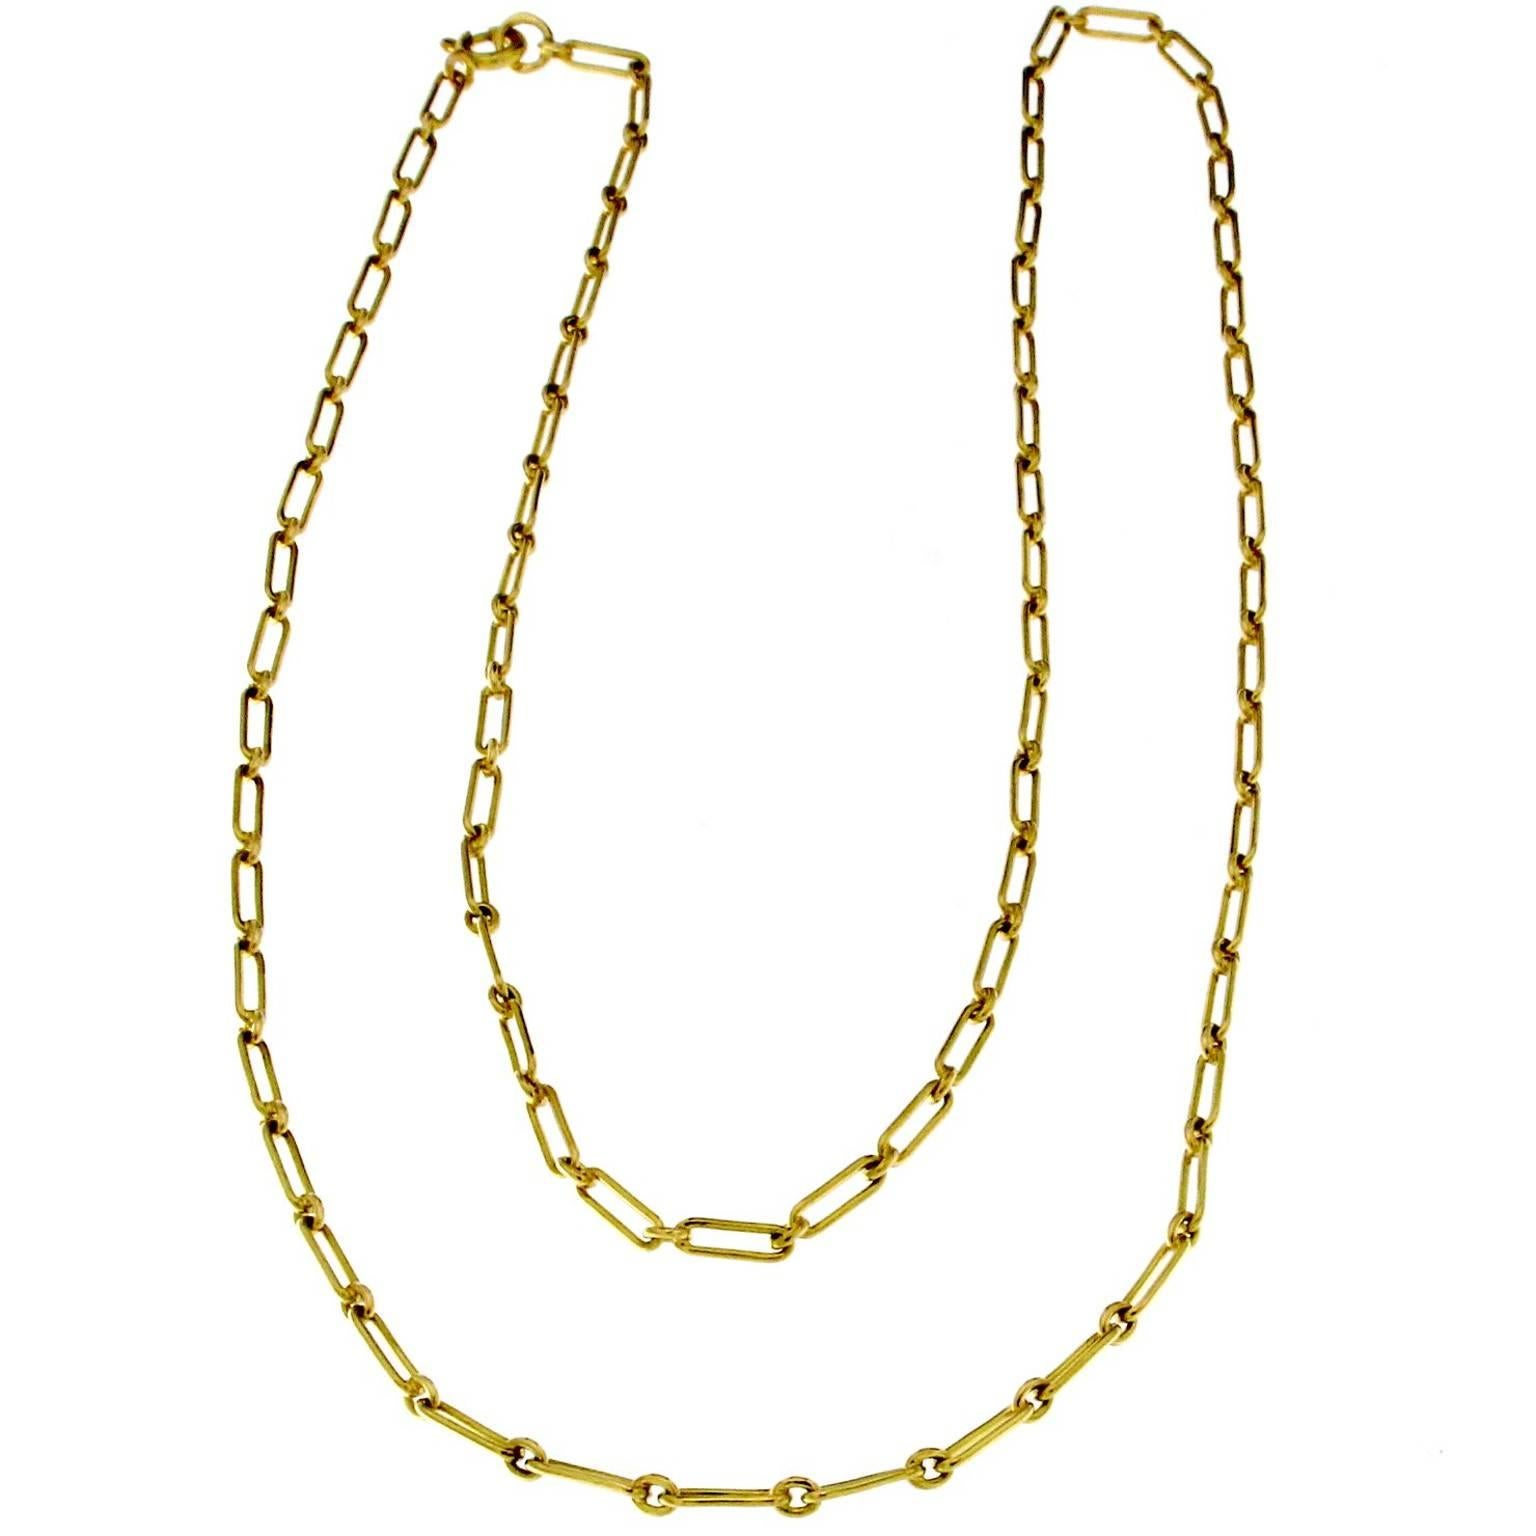 Handcrafted Long Yellow Gold Chain in 18 Karat